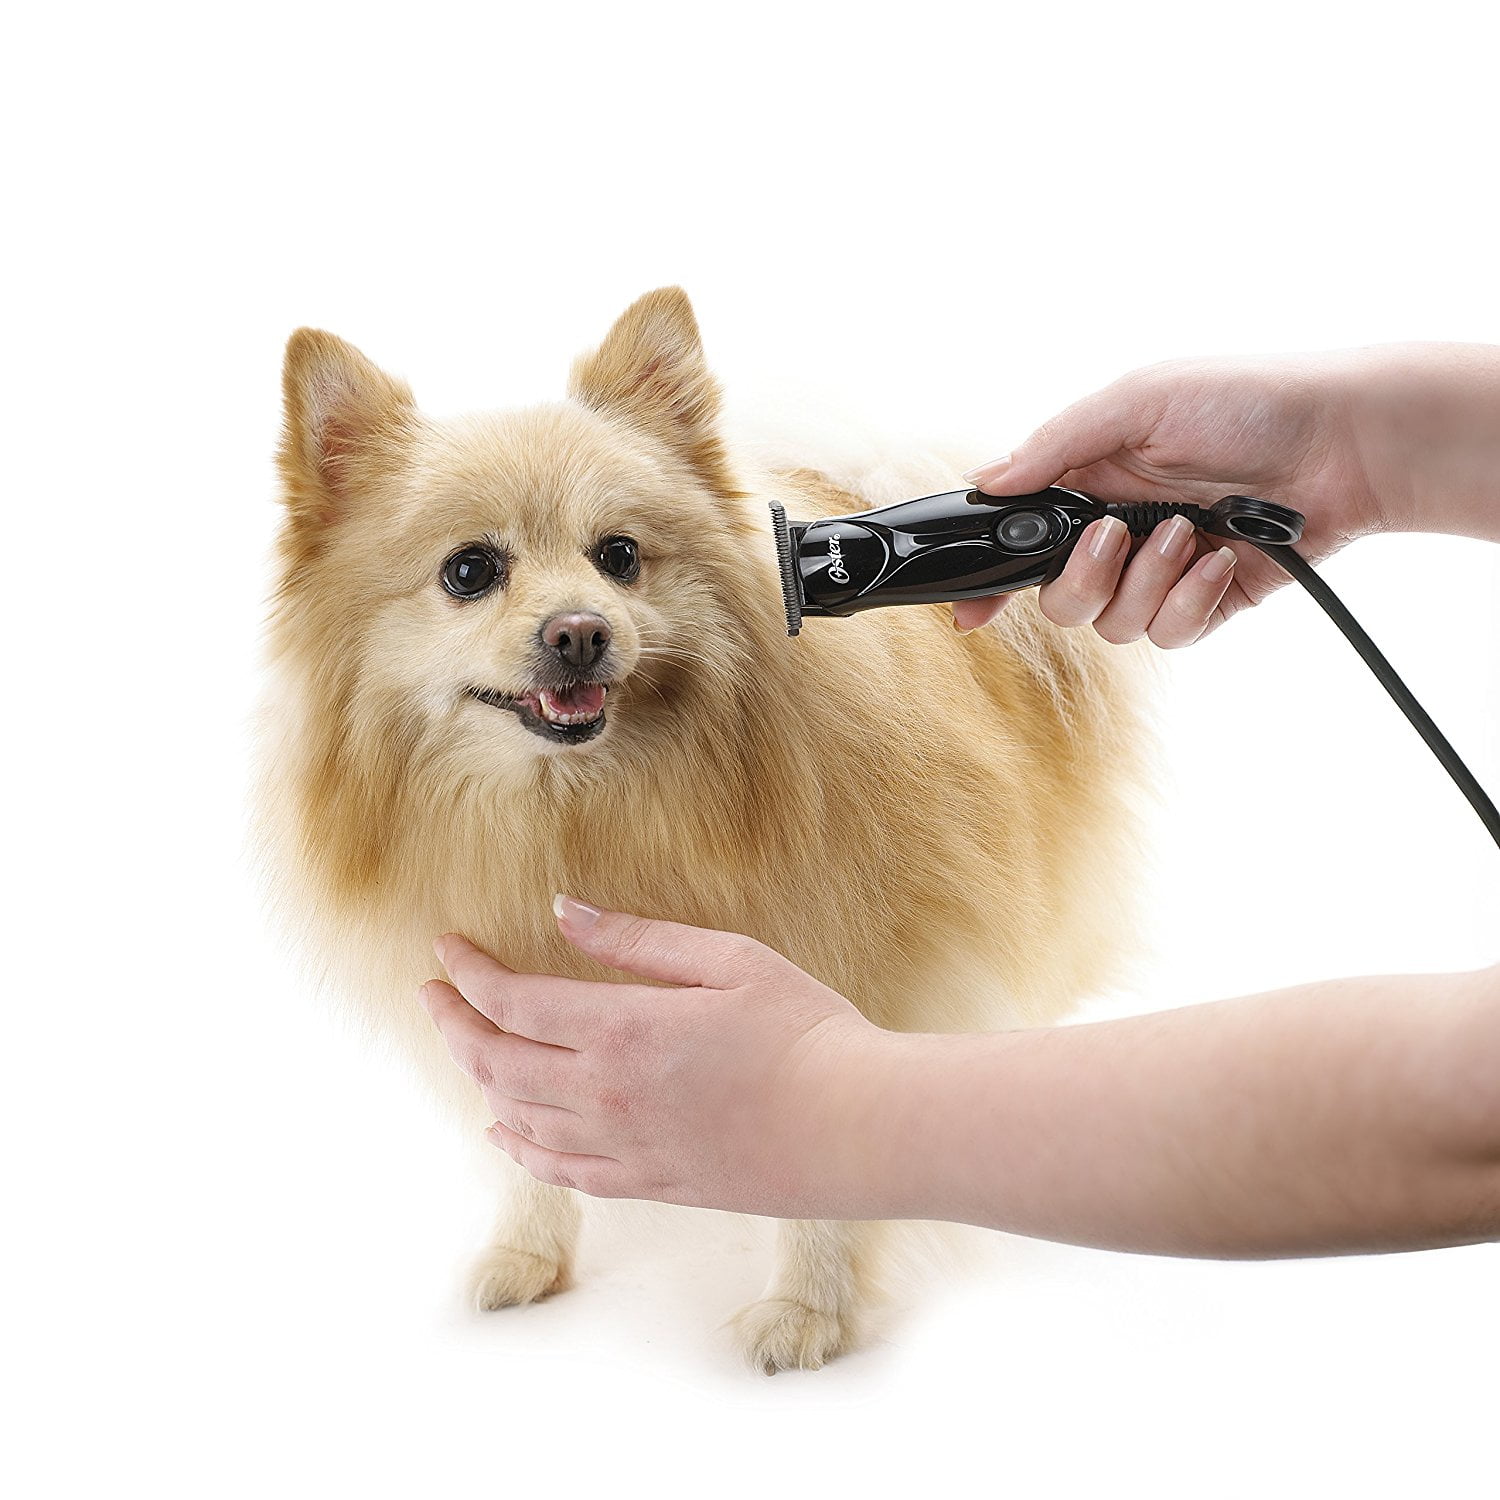 oster animal care pro trimmer